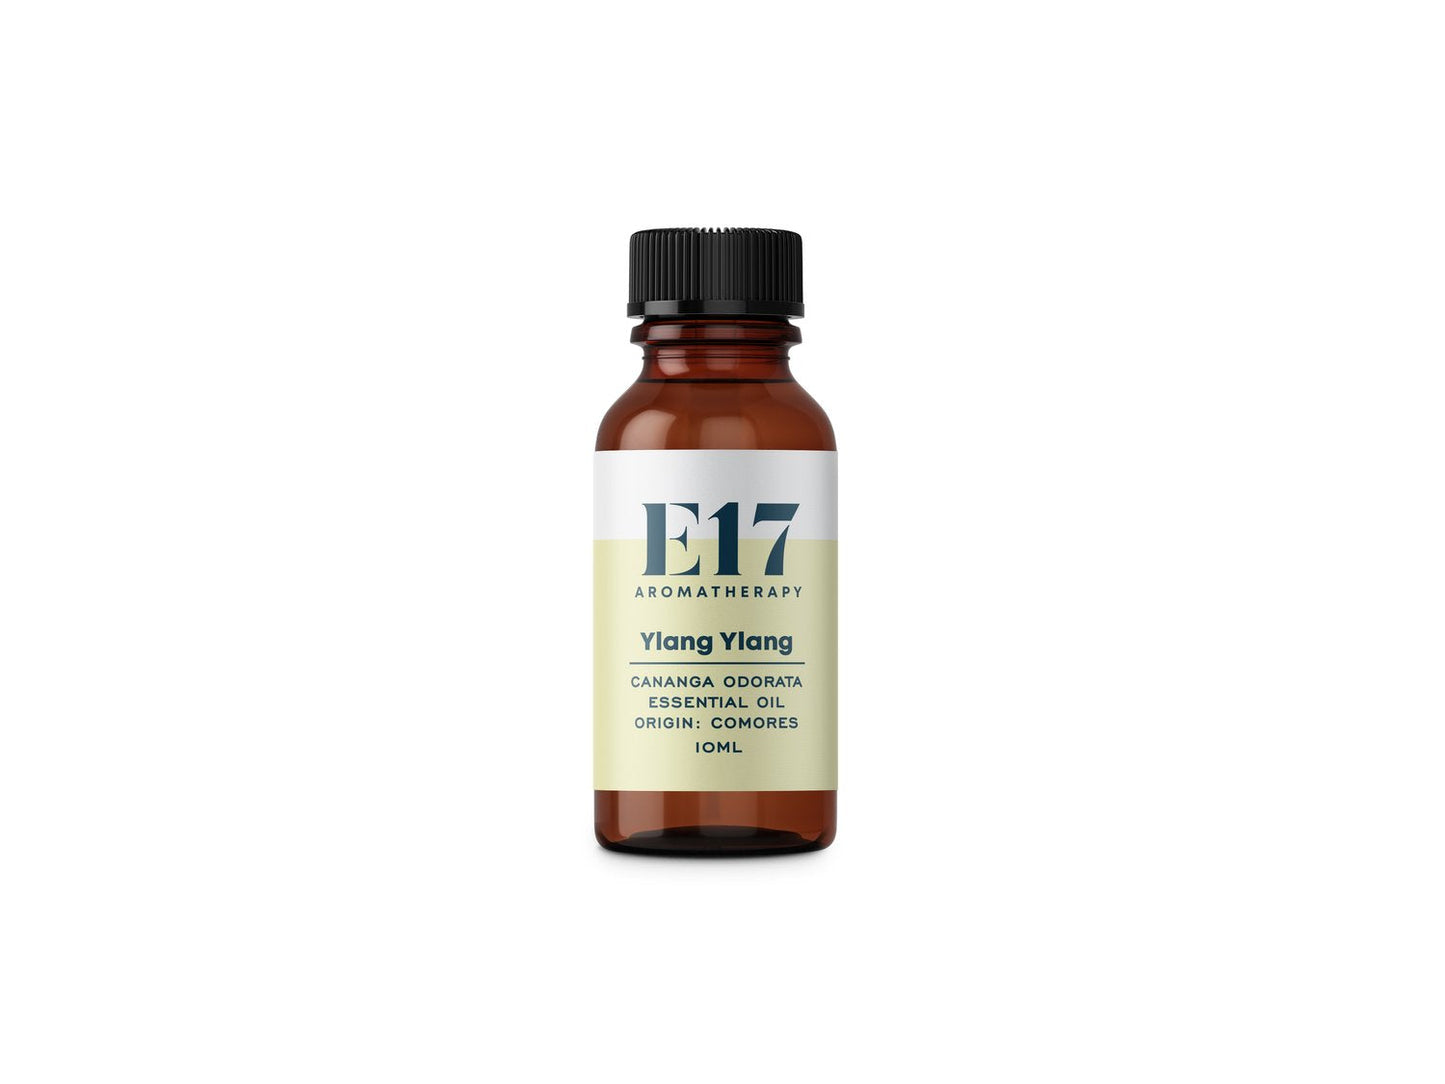 The Every Space 10ml Ylang Ylang pure essential oil by E17 Aromatherapy